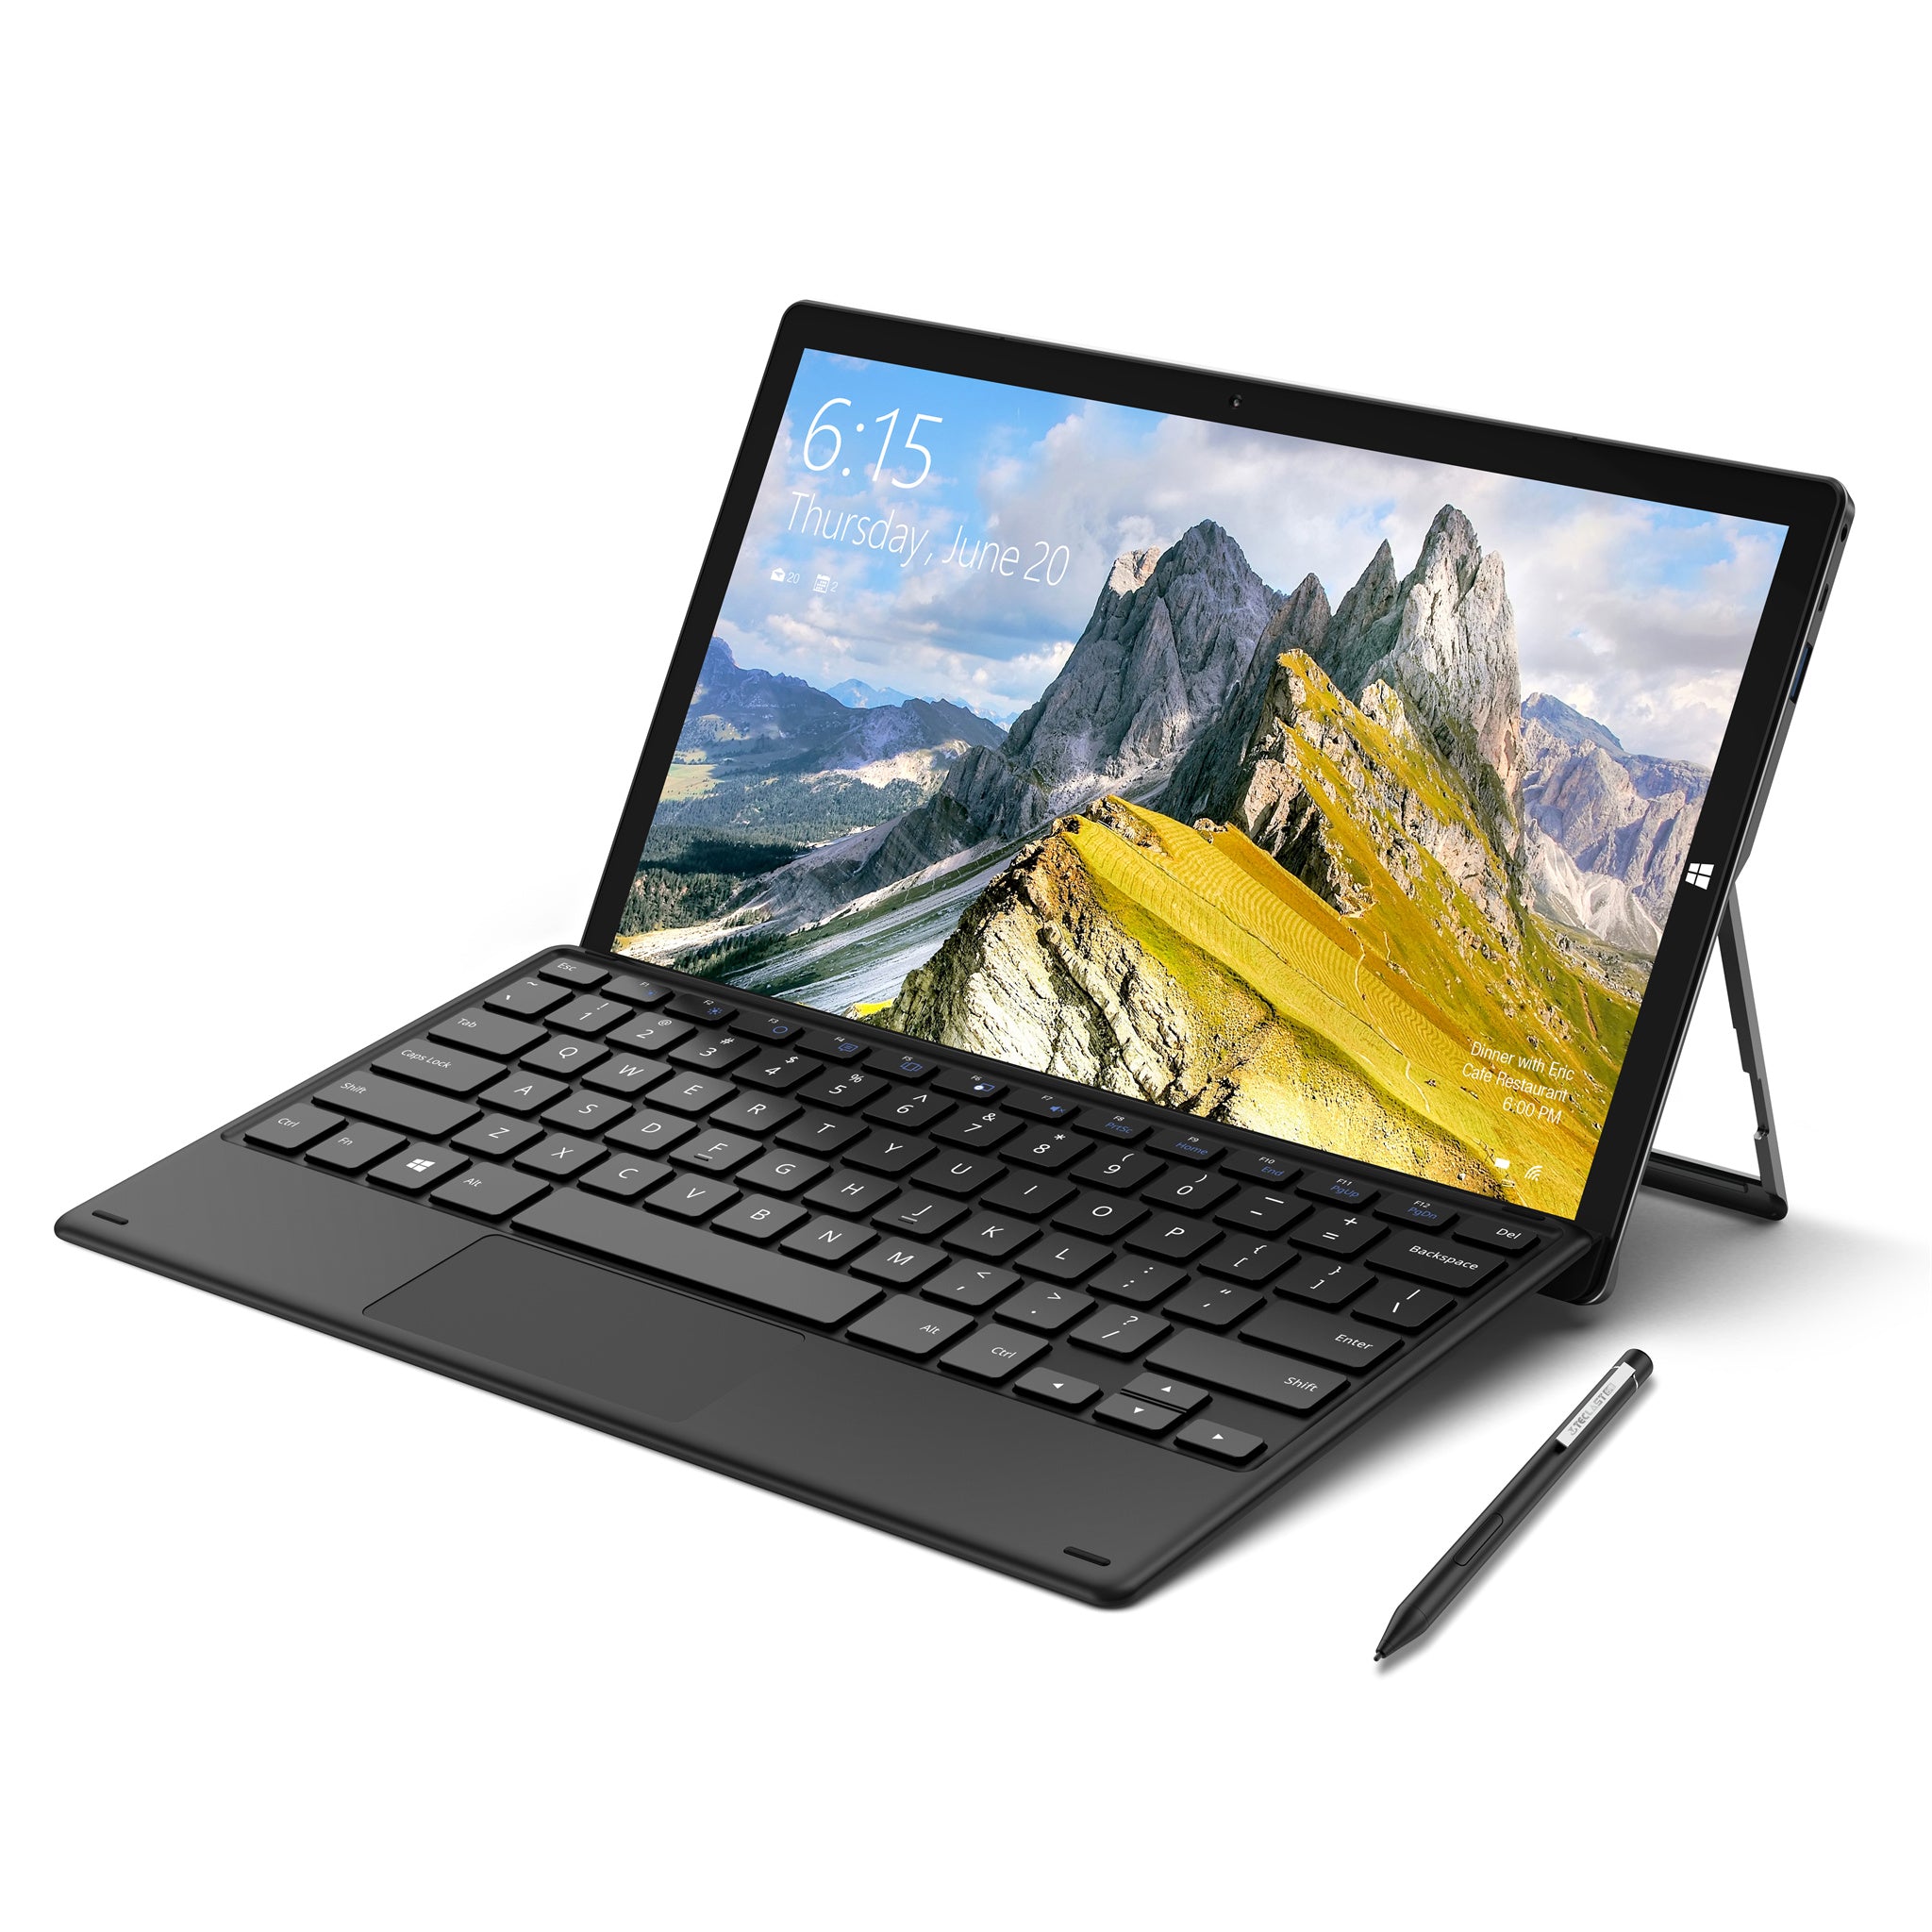 X16 2-in-1 Tablet